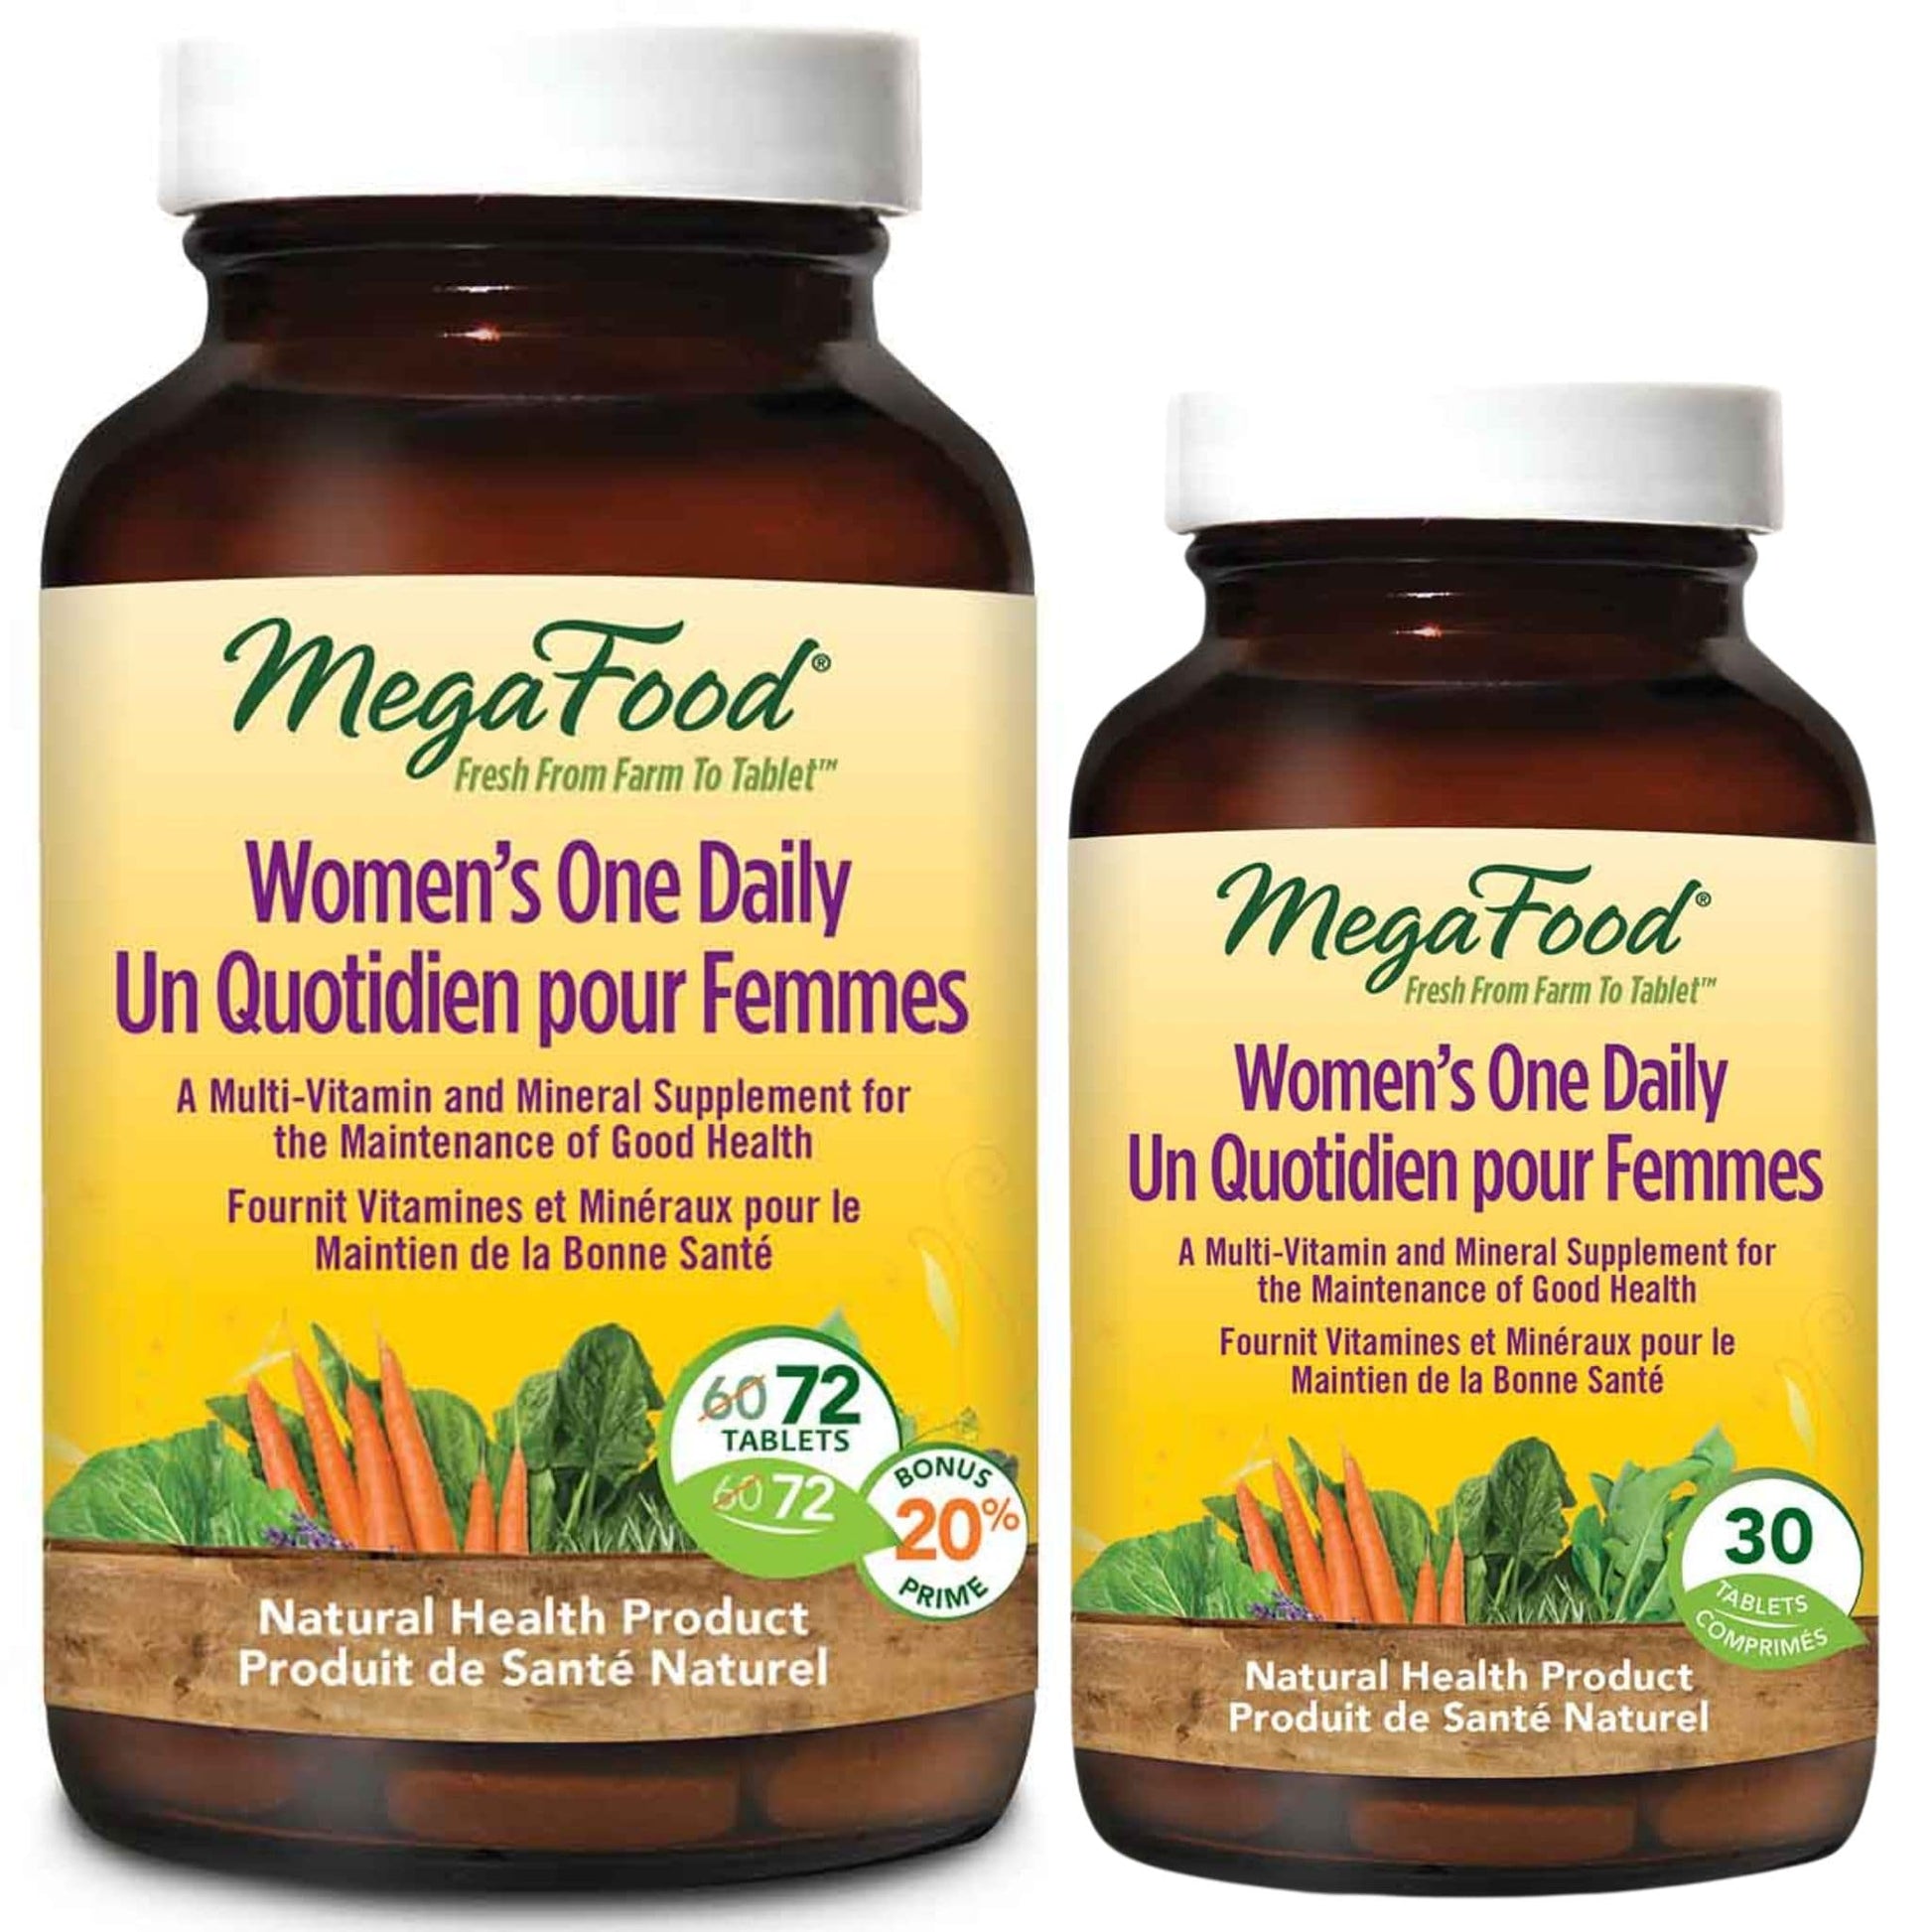 72 + 30 Tablets Free | MegaFood Women's One Daily Multivitamin